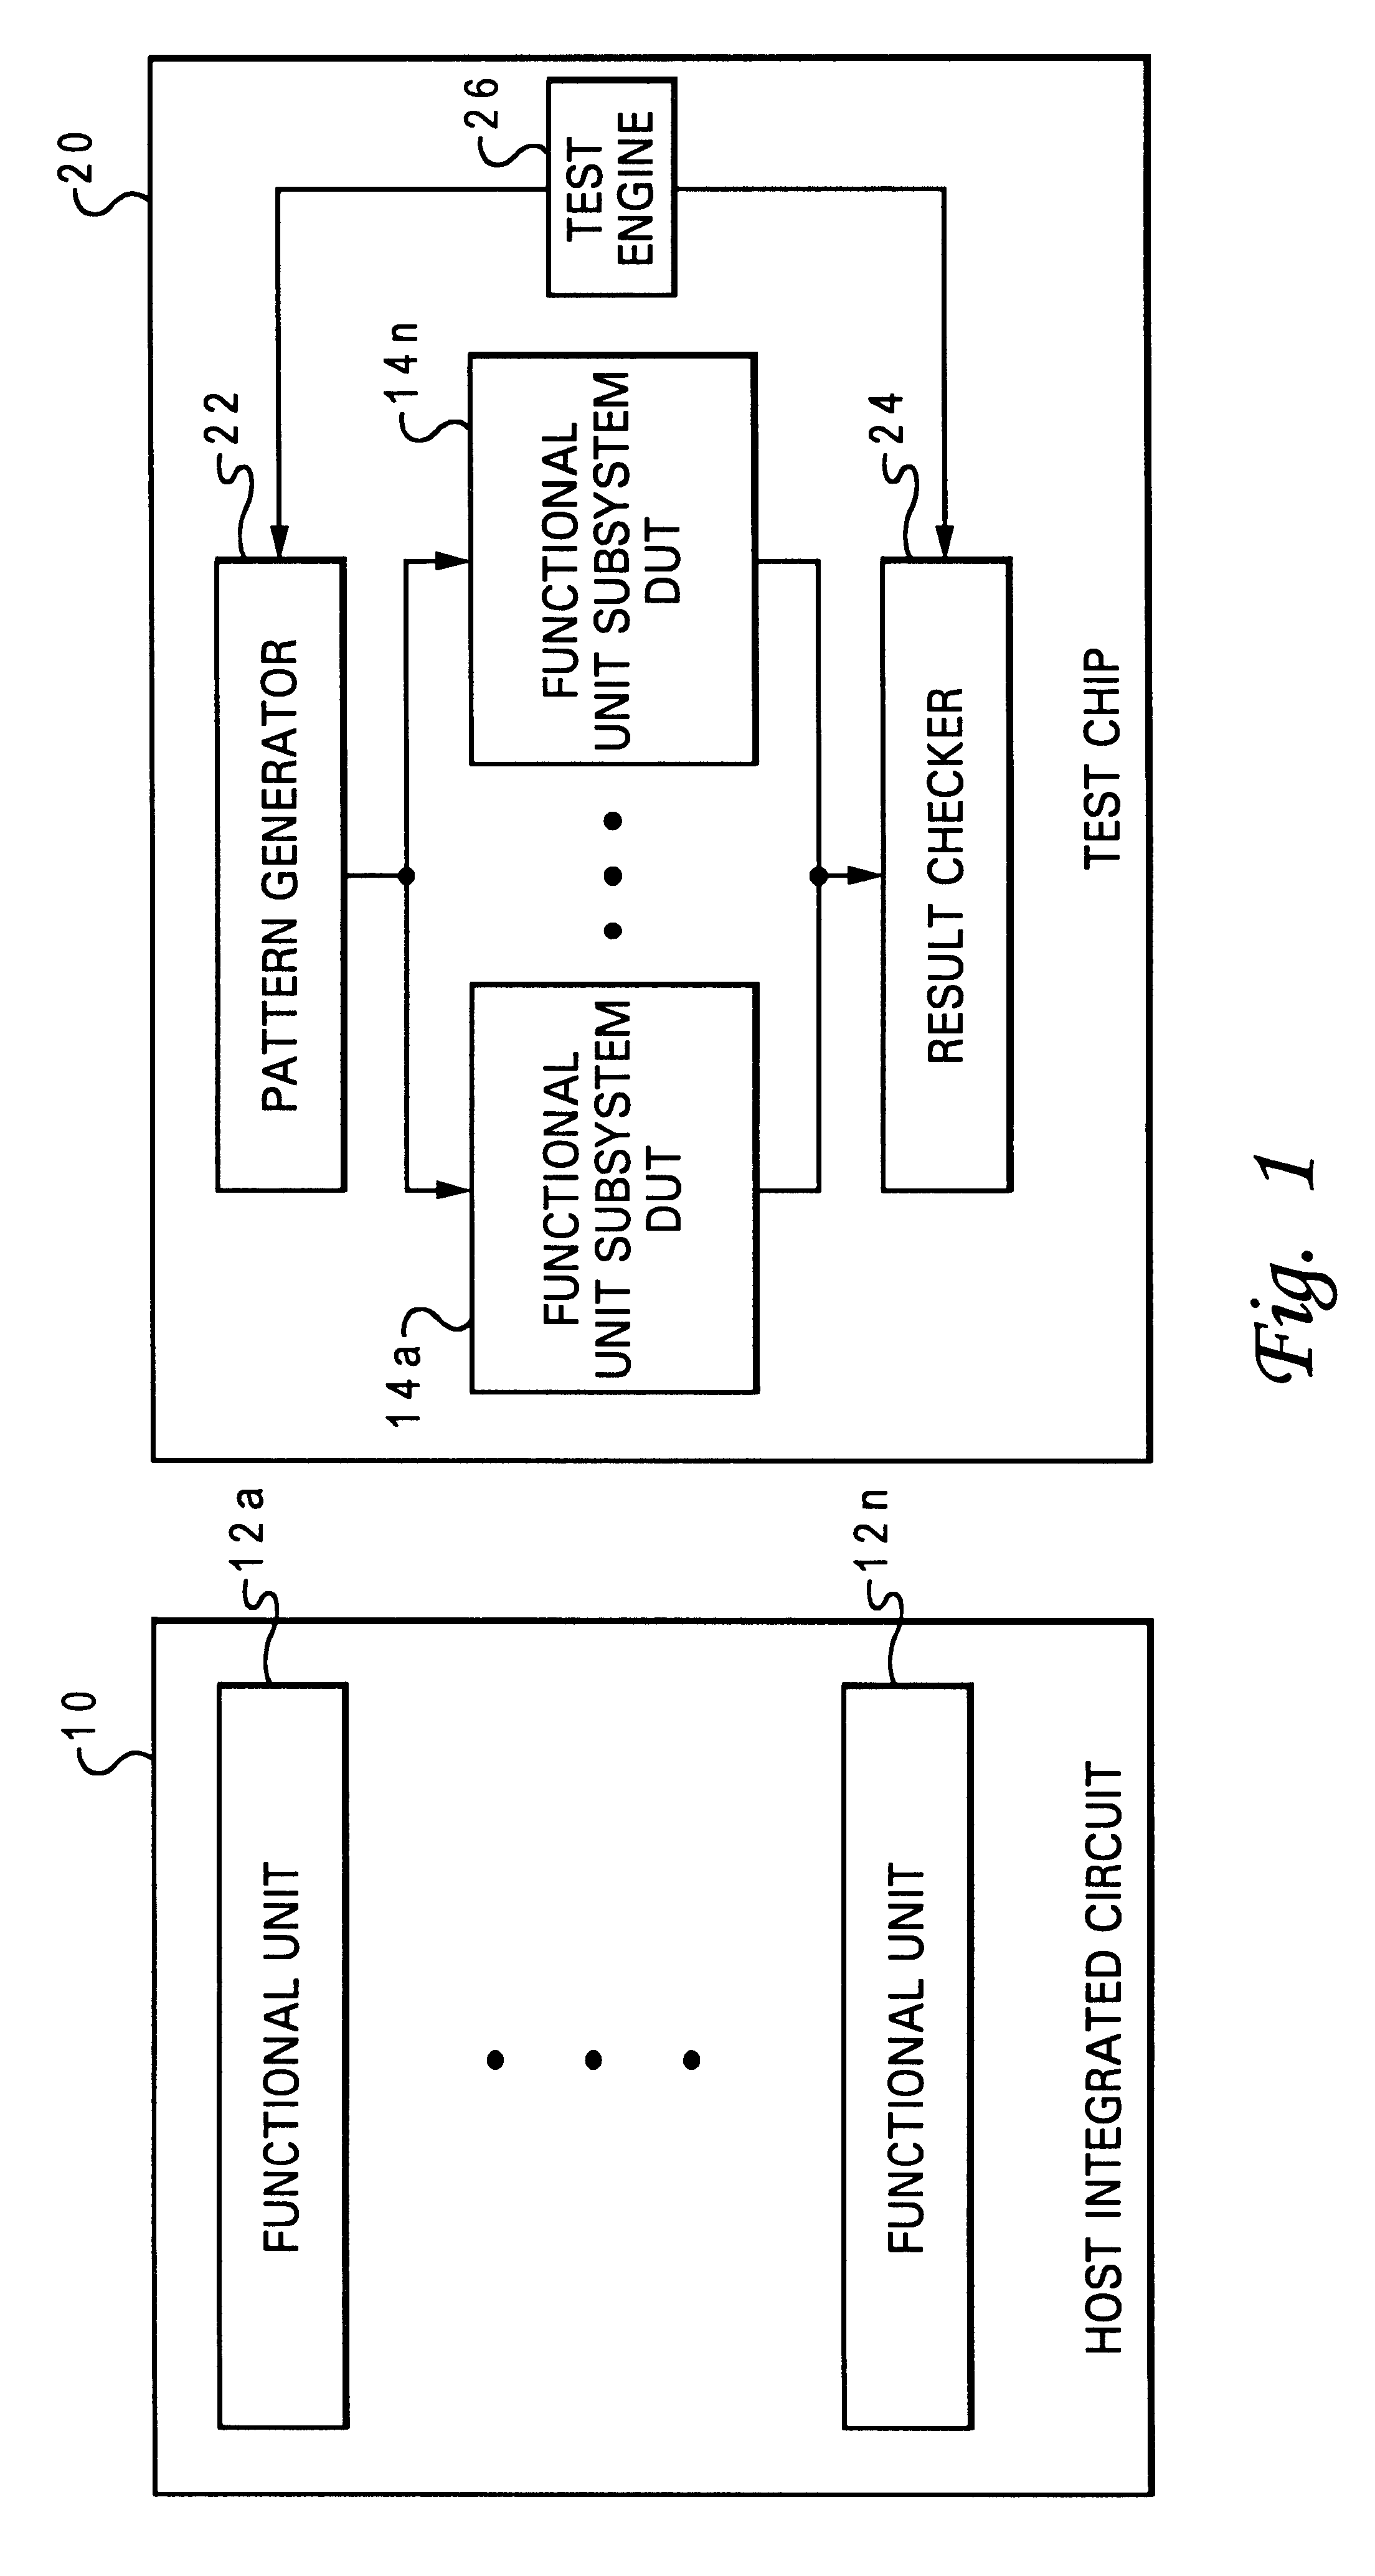 Method and system for performing pseudo-random testing of an integrated circuit